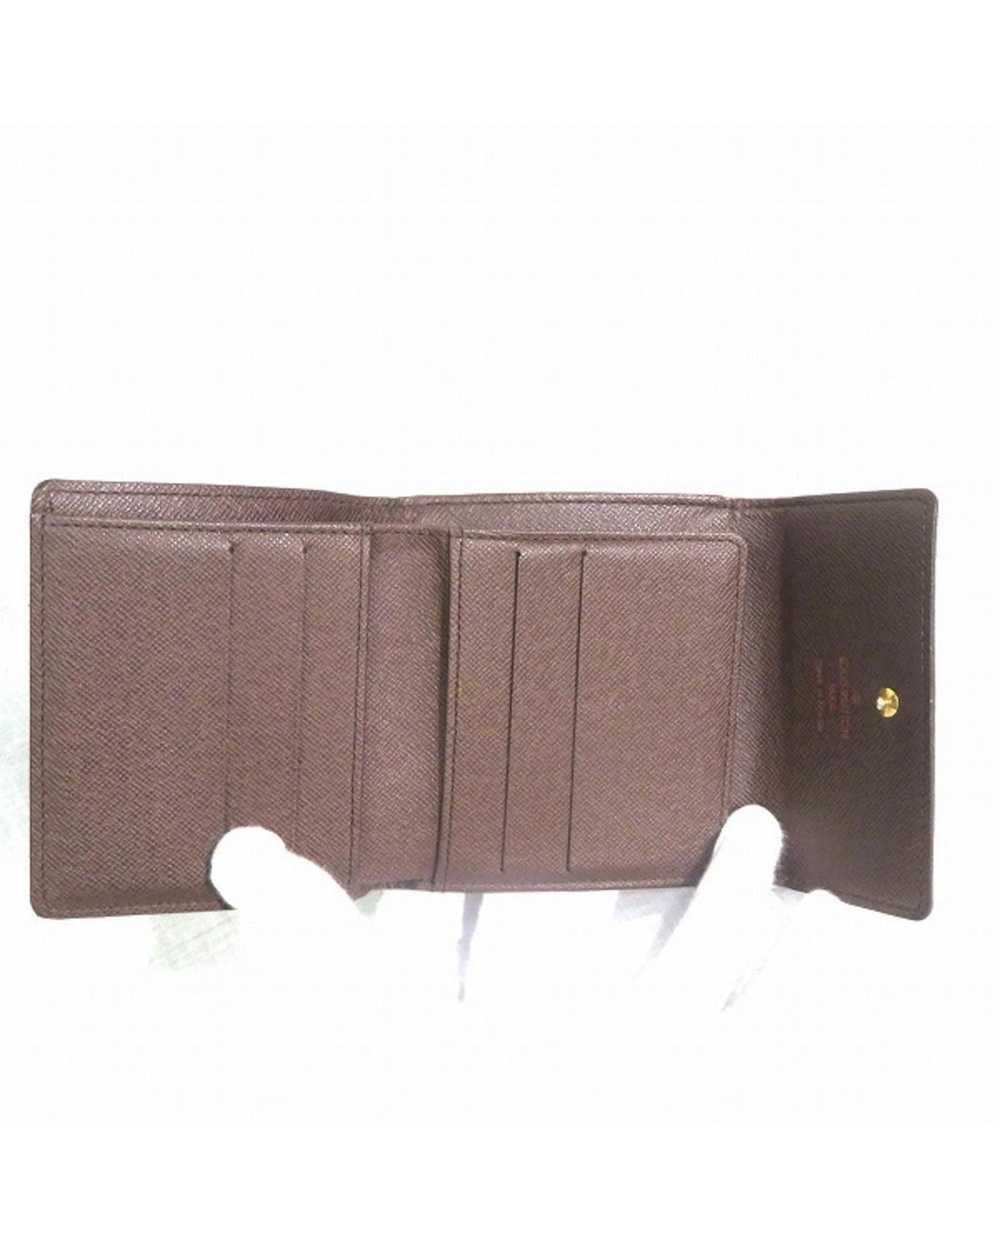 Louis Vuitton Sophisticated Leather Card Holder - image 2